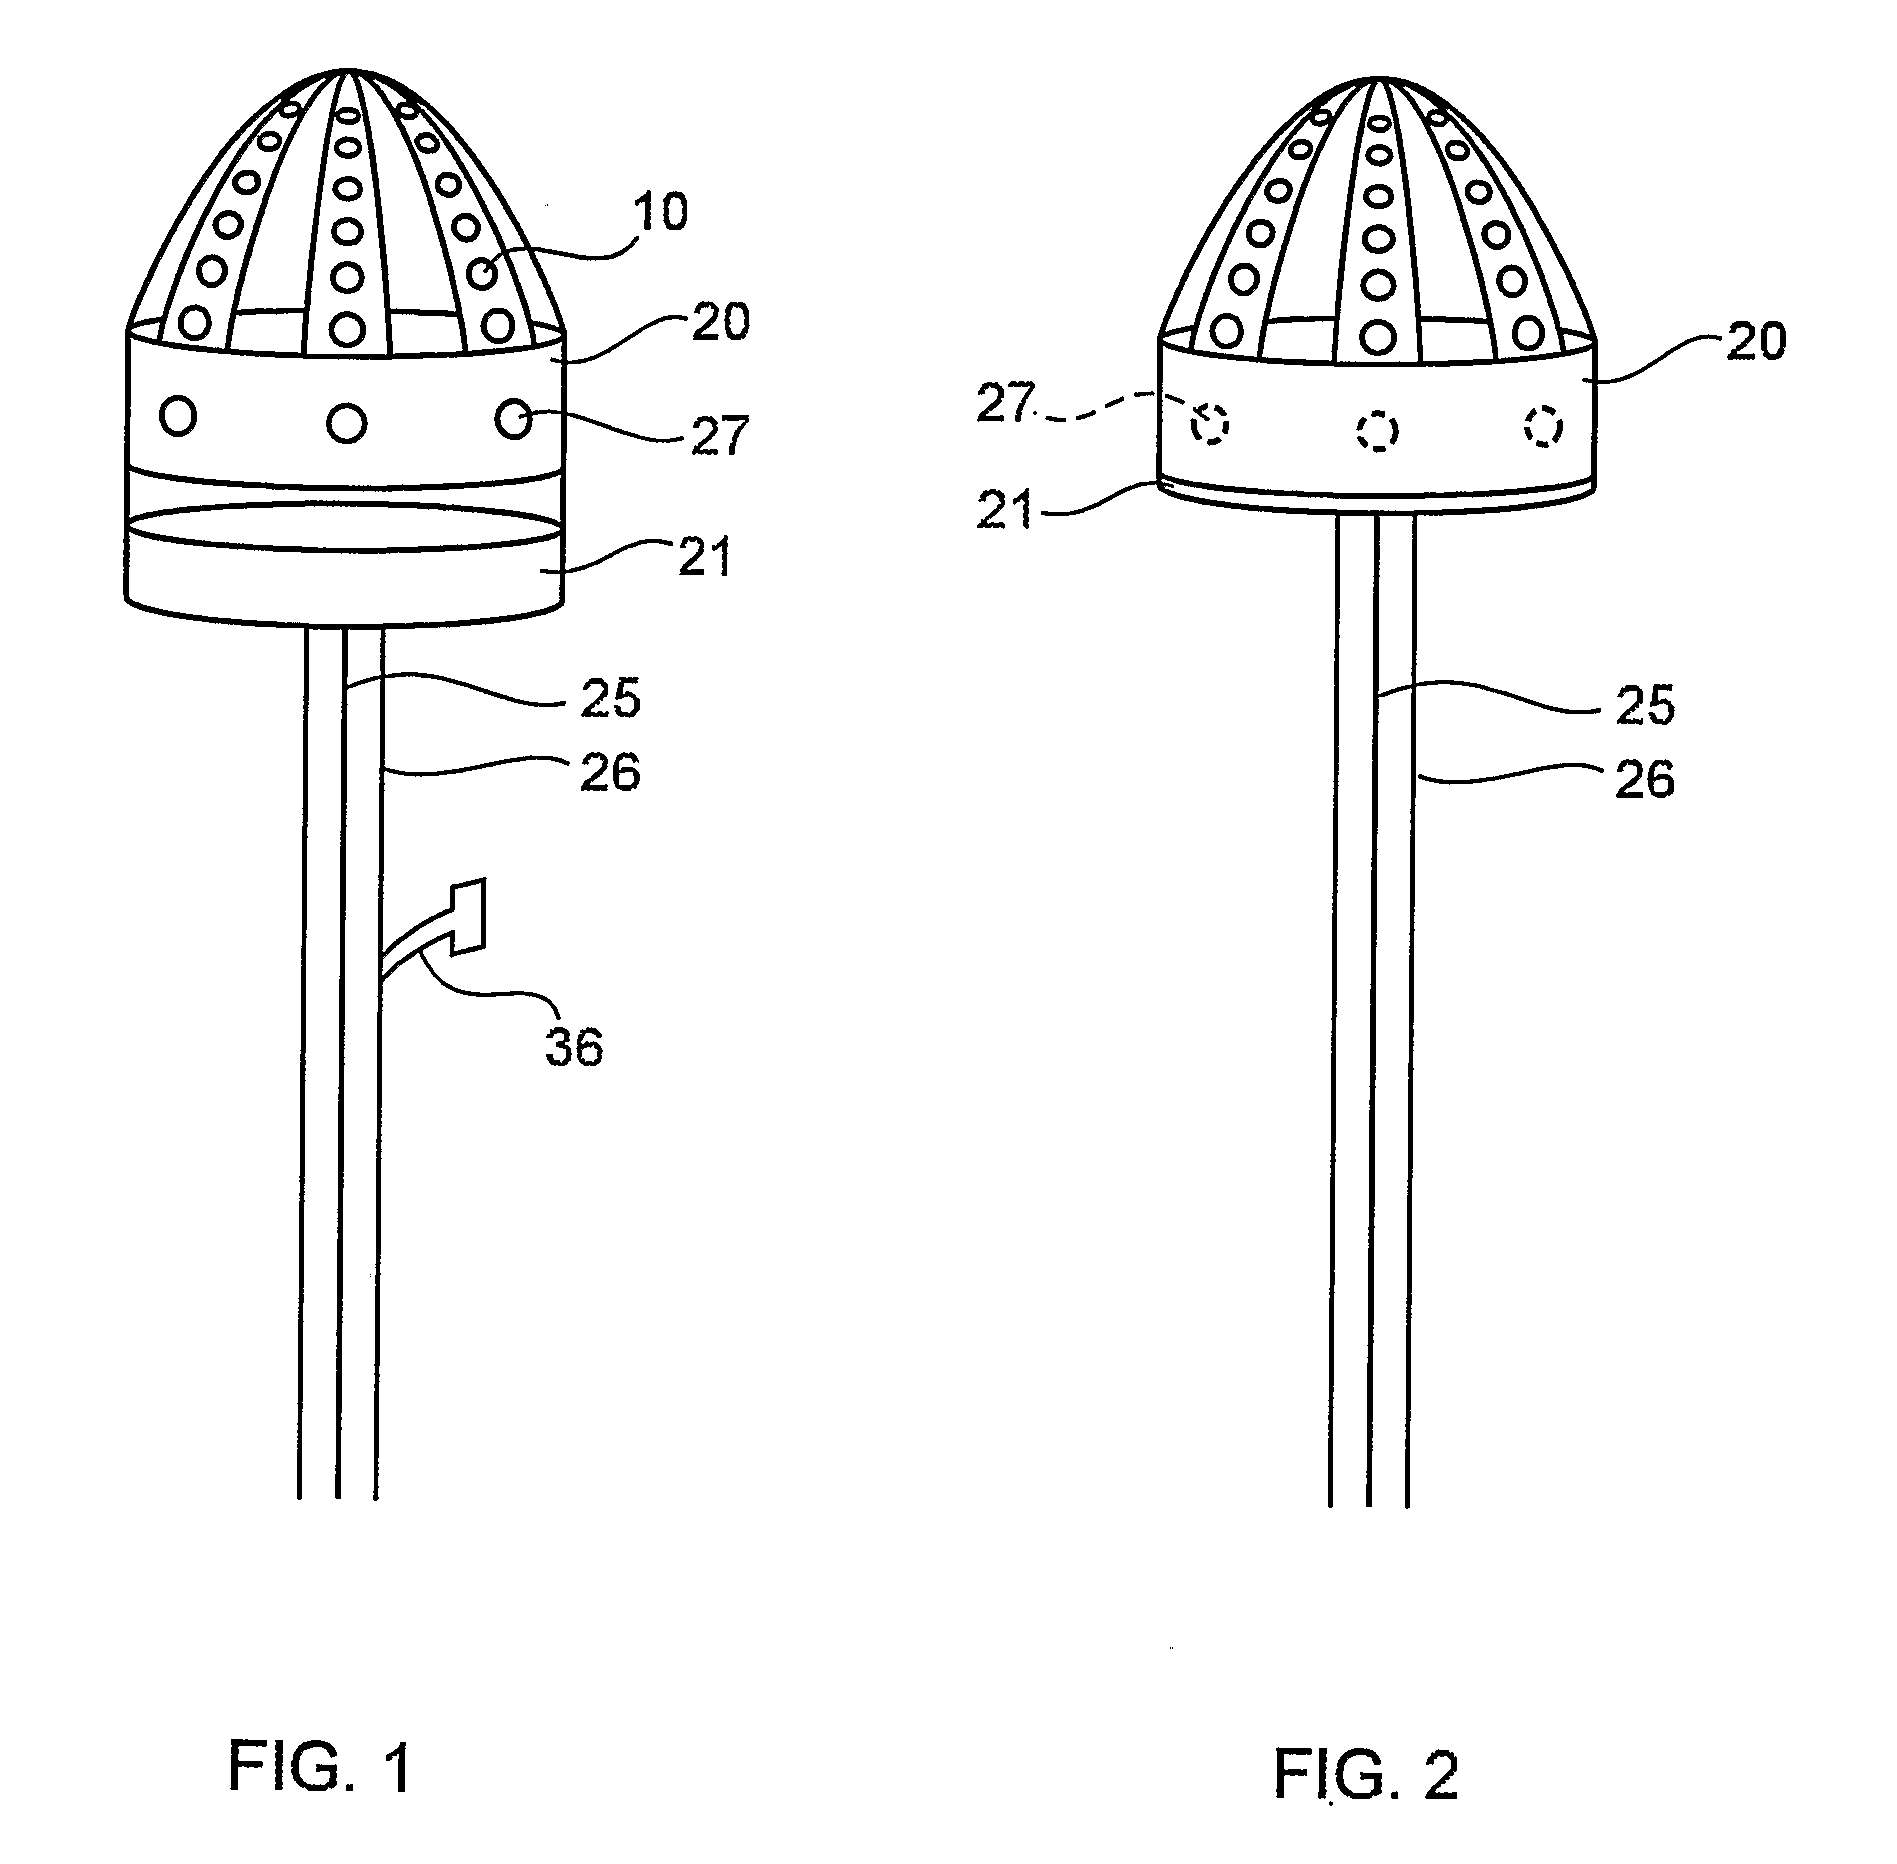 Apparatus for Circumferential Suction Step Multibiopsy of the Esophagus or Other Luminal Structure with Serial Collection, Storage and Processing of Biopsy Specimens within a Removable Distal Cassette for In Situ Analysis